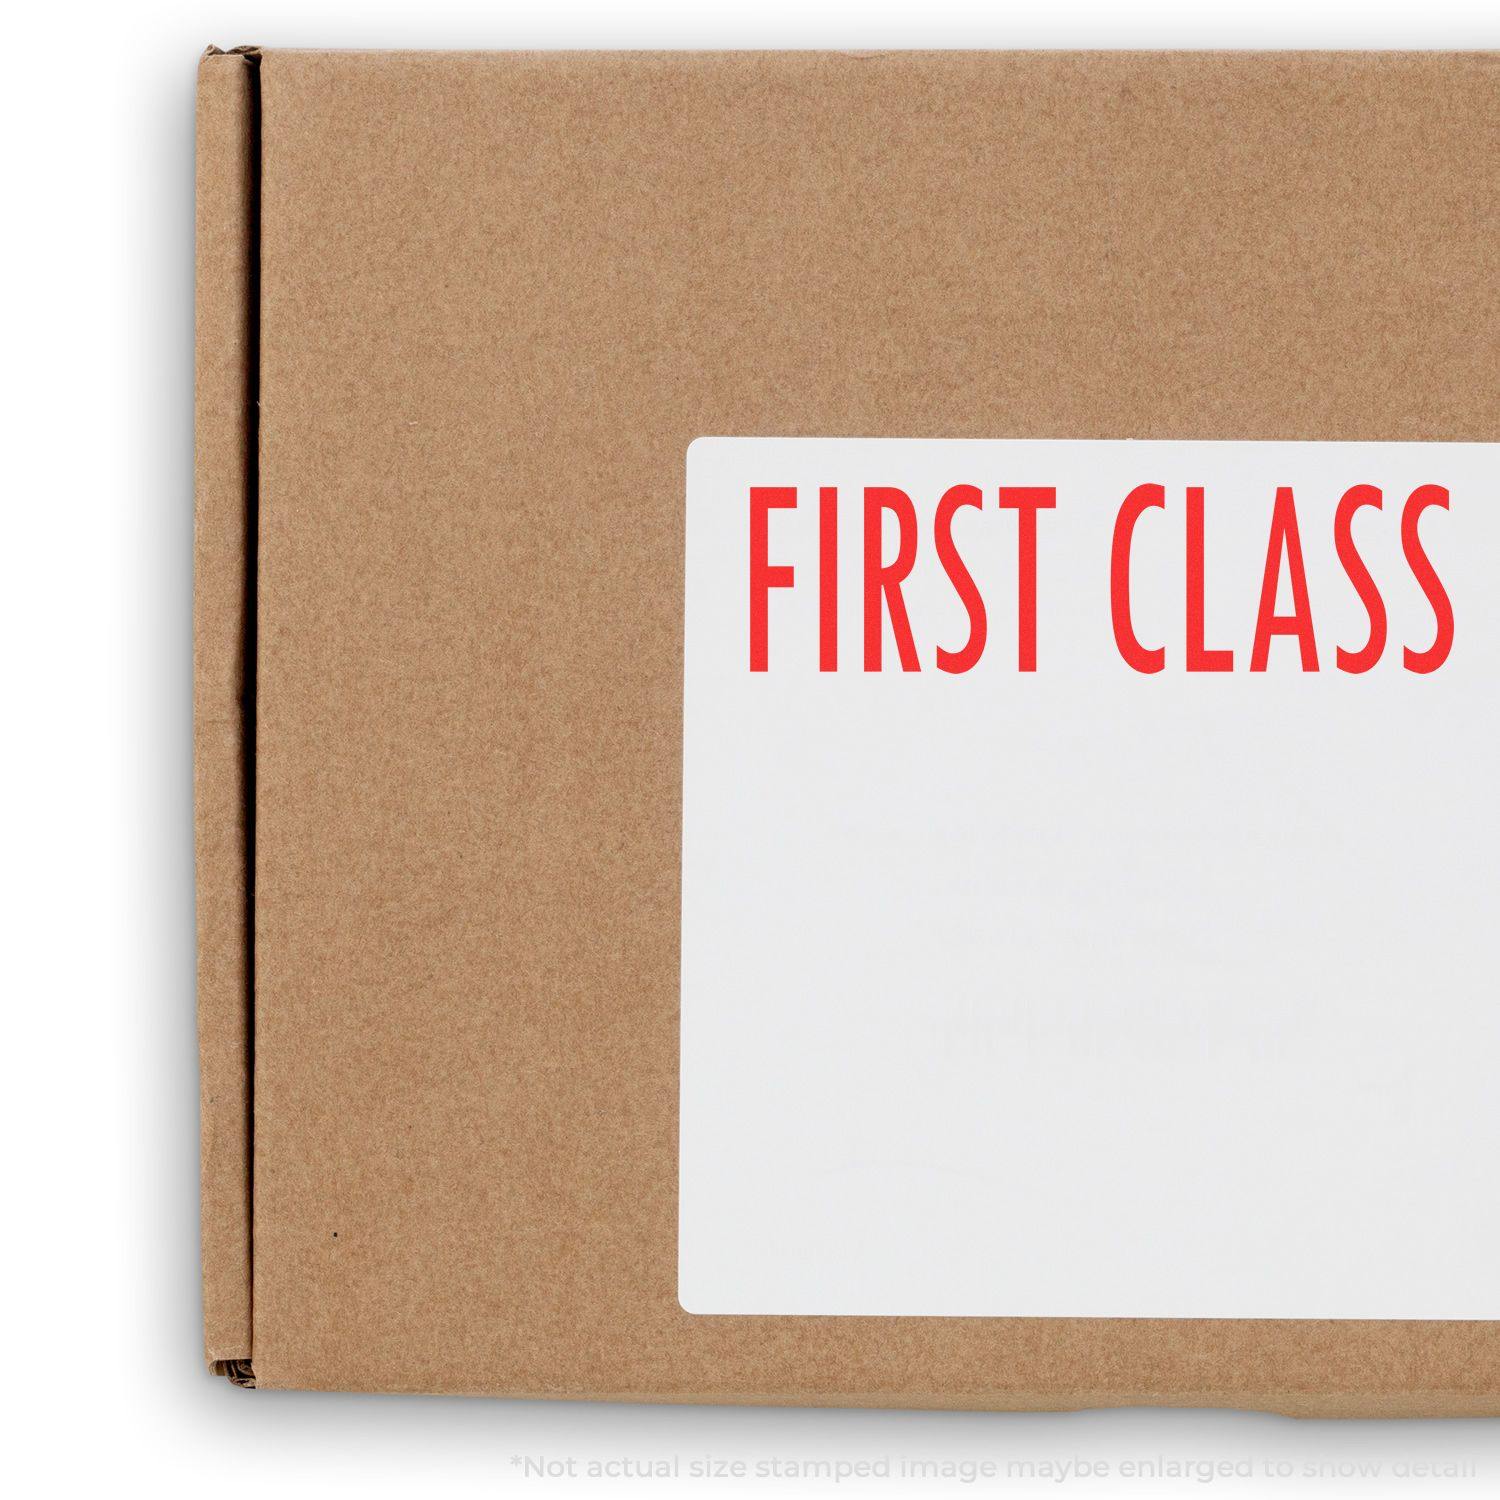 A self-inking stamp with a stamped image showing how the text "FIRST CLASS" is displayed after stamping.